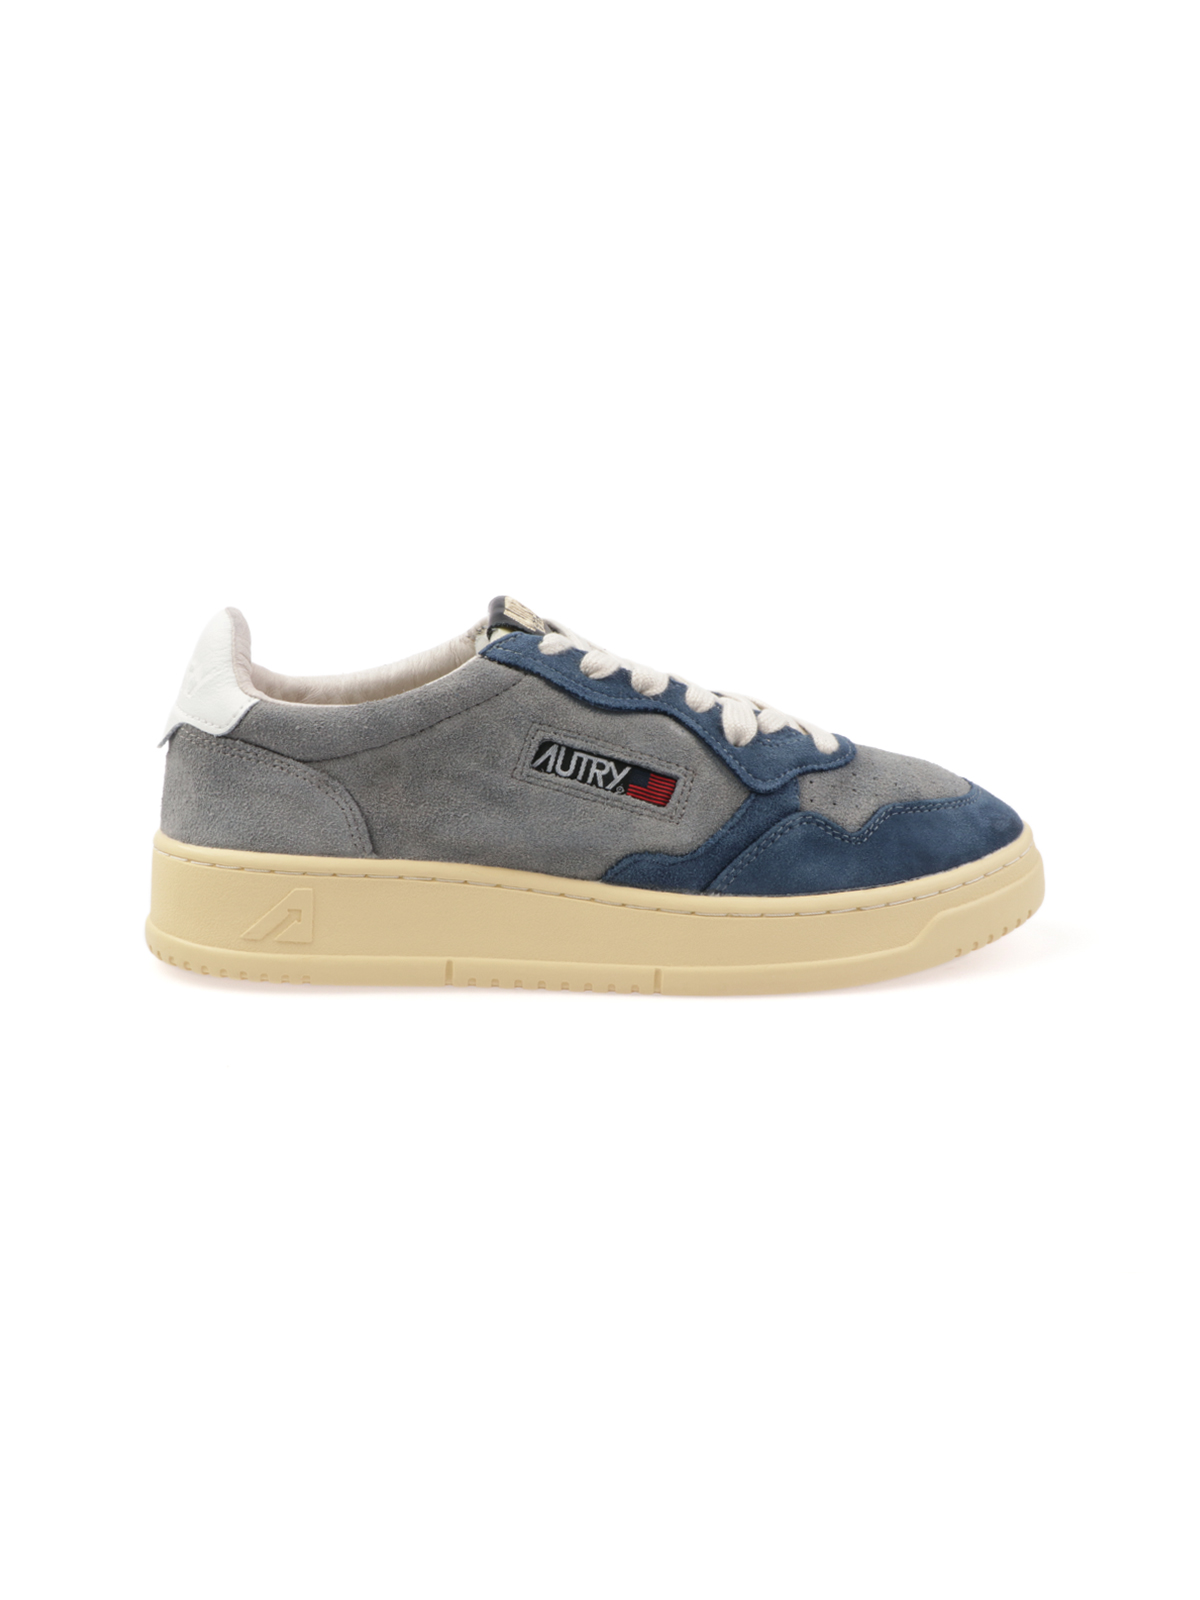 Picture of AUTRY | Men's Medalist Low Suede Sneakers